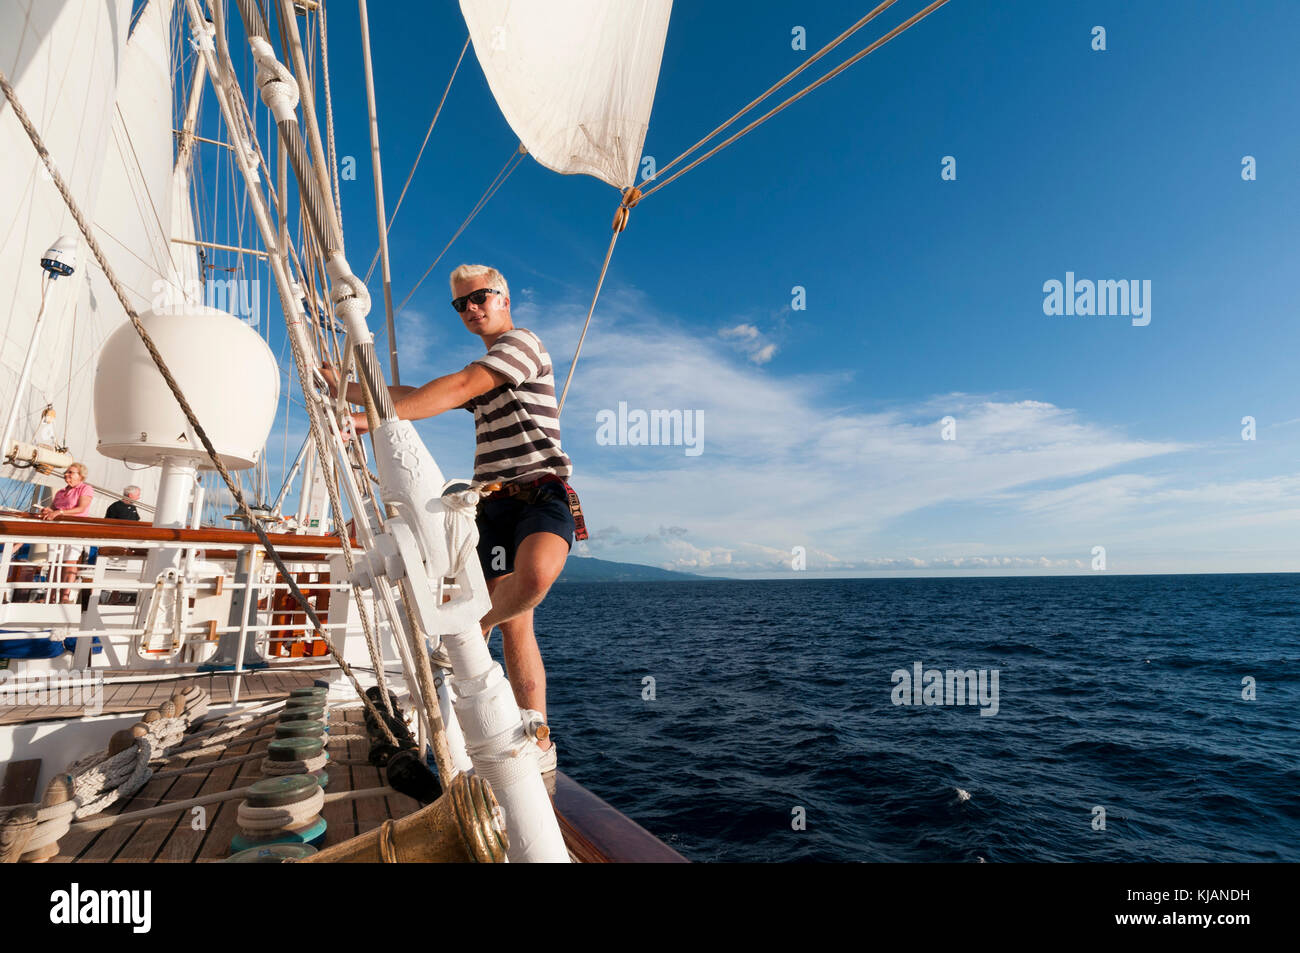 Star Clipper sailing cruise ship, Deshaies, Basse-Terre, Guadeloupe, French Caribbean, France Stock Photo